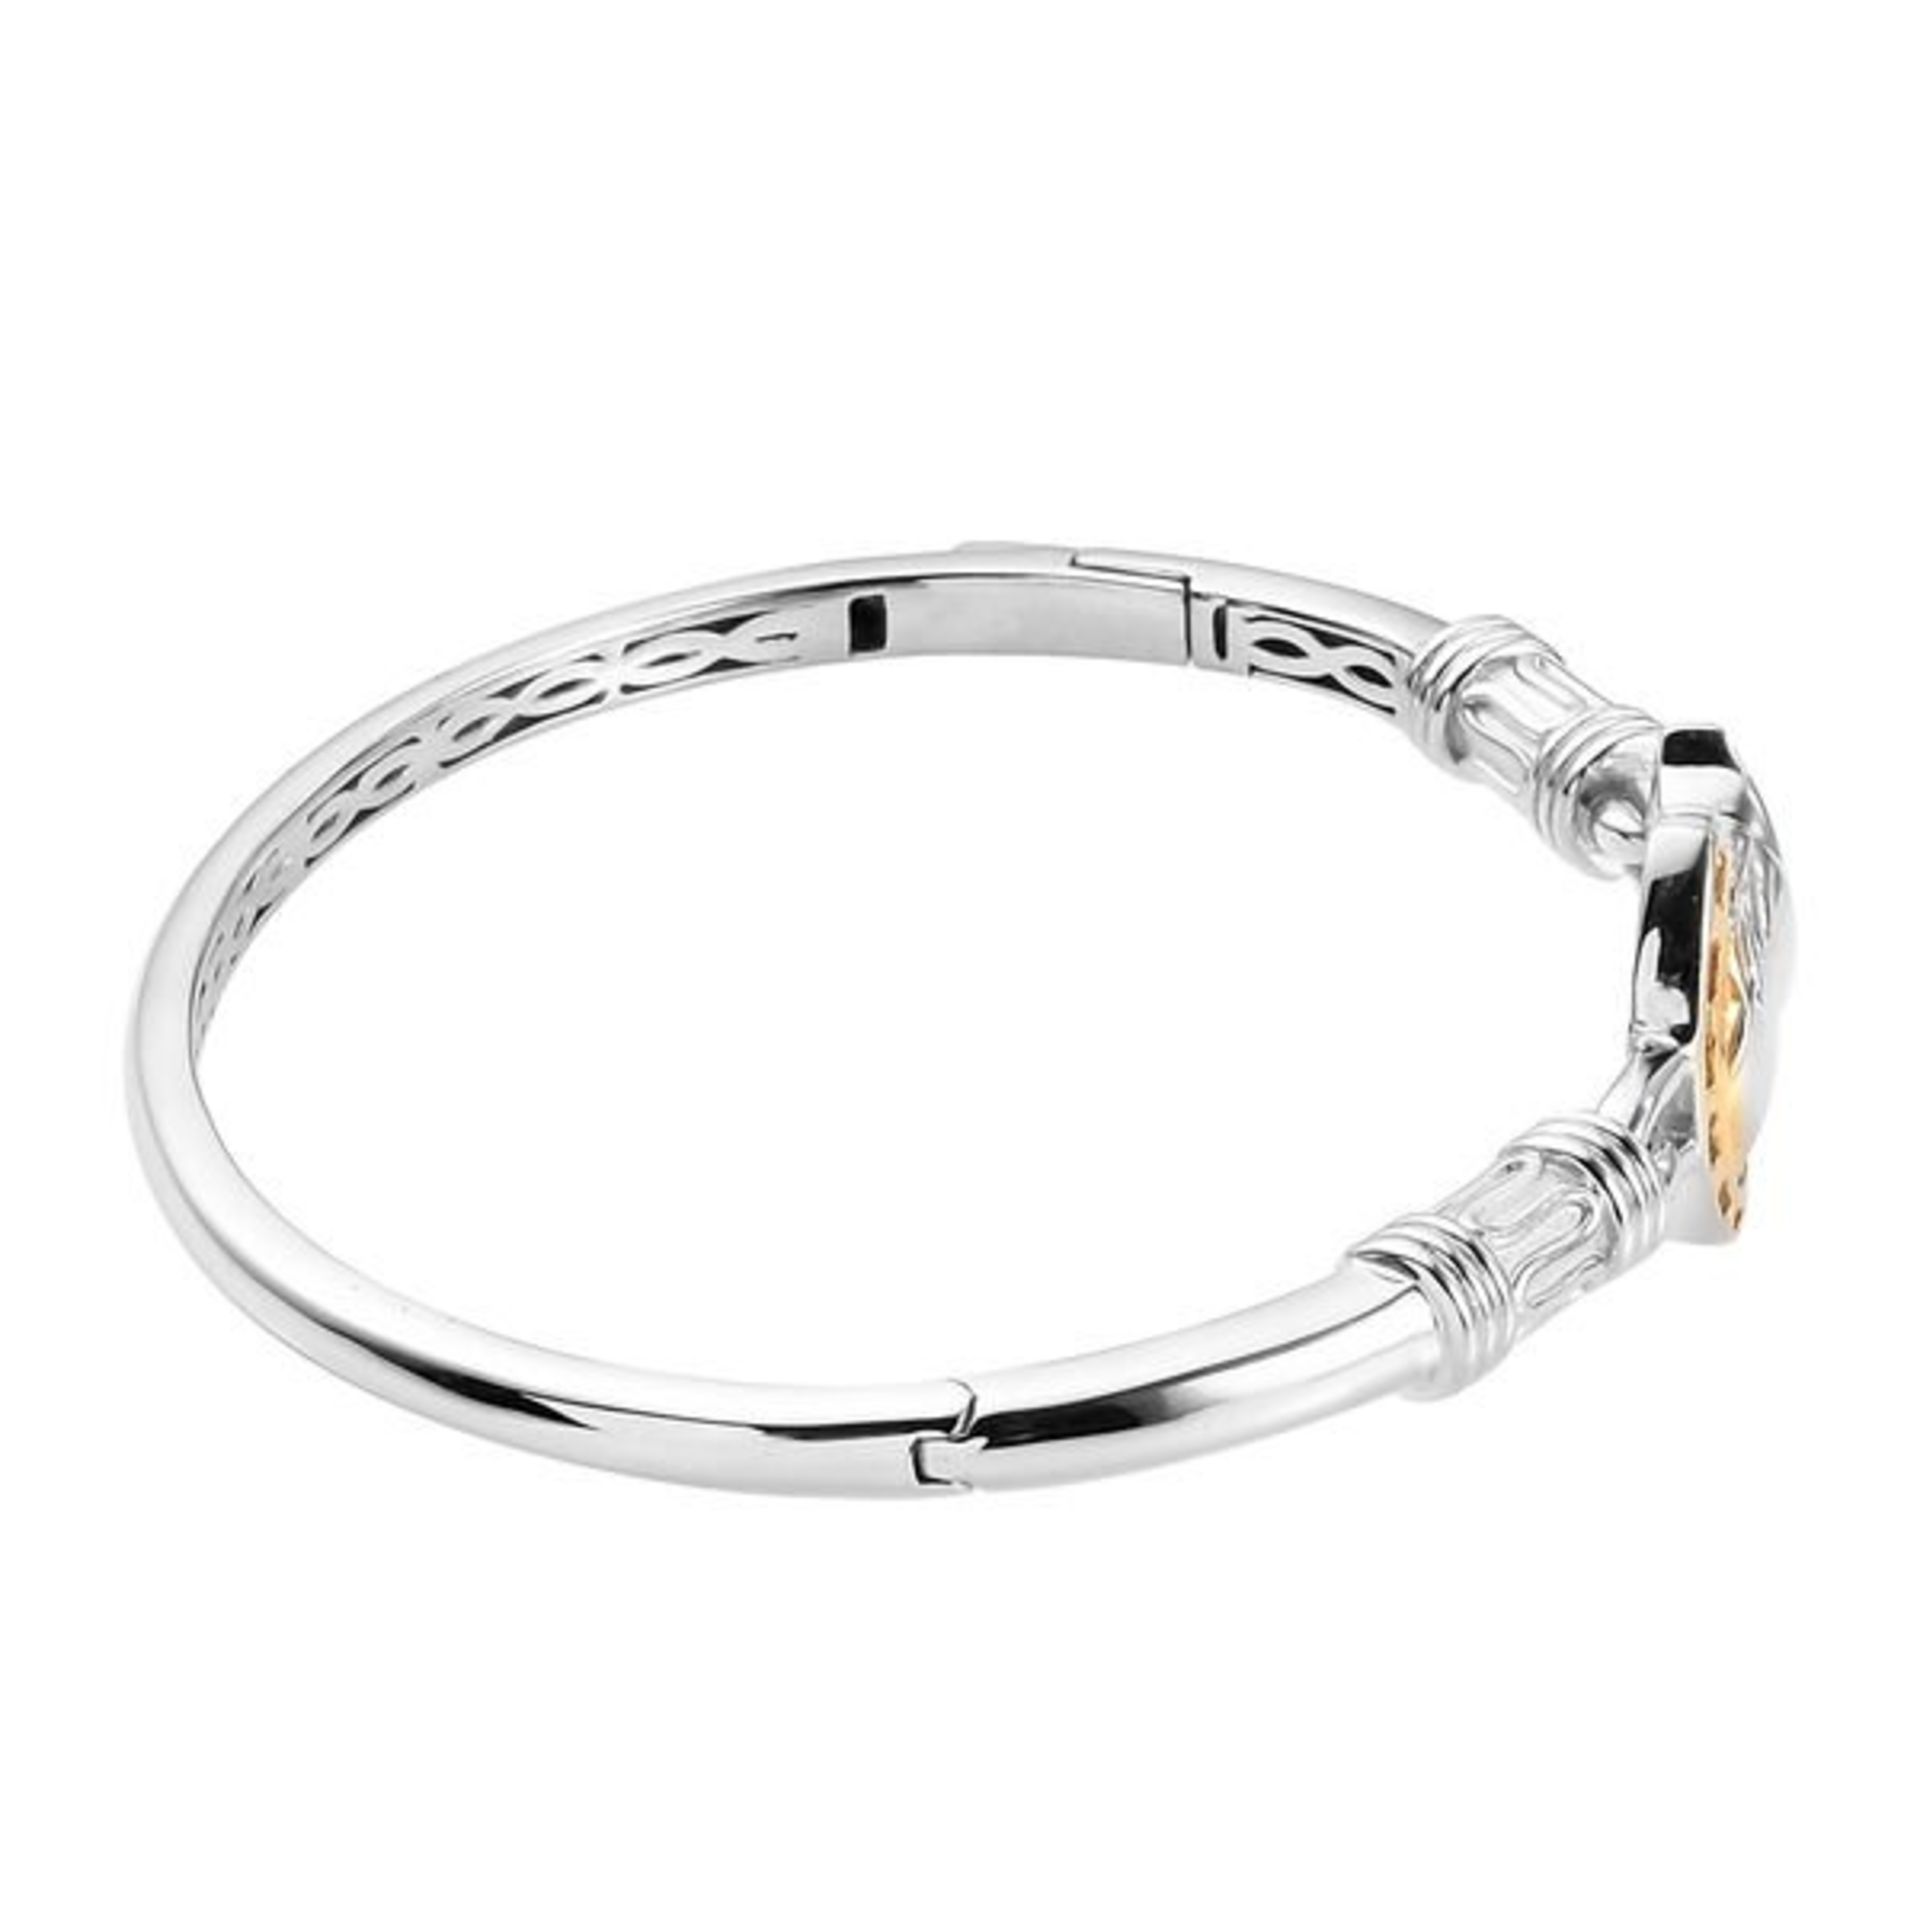 NEW!! Horse Bangle in Platinum and Gold Plated White Brass - Image 3 of 4